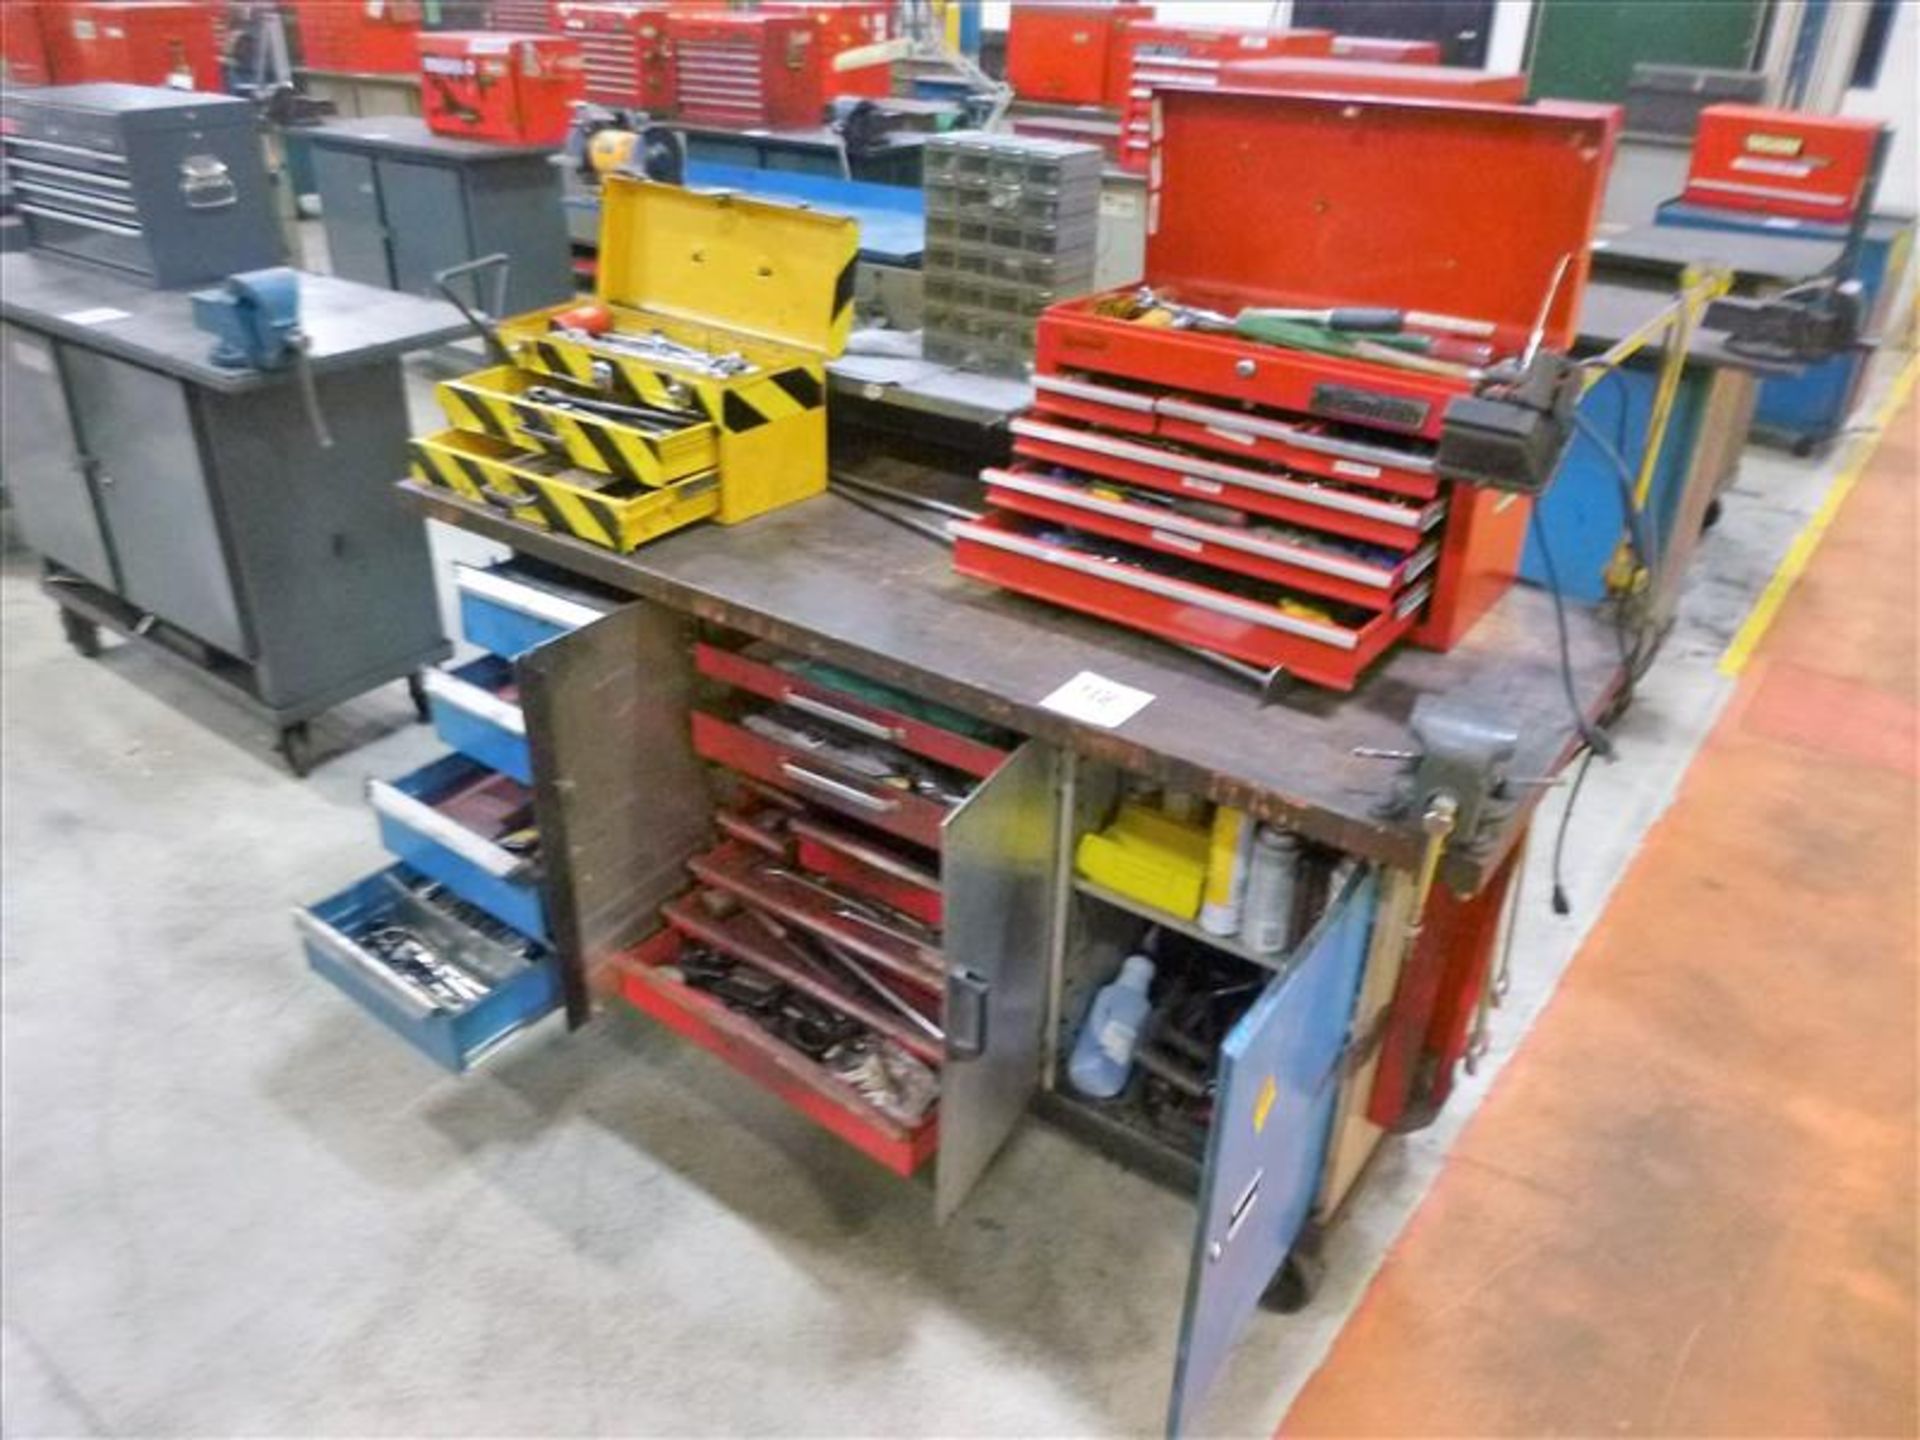 Rolling Work Bench, approx. 30" x 72" c/w 4" Bench Vice & Contents (Hand Tools, Spare Parts, - Image 3 of 4